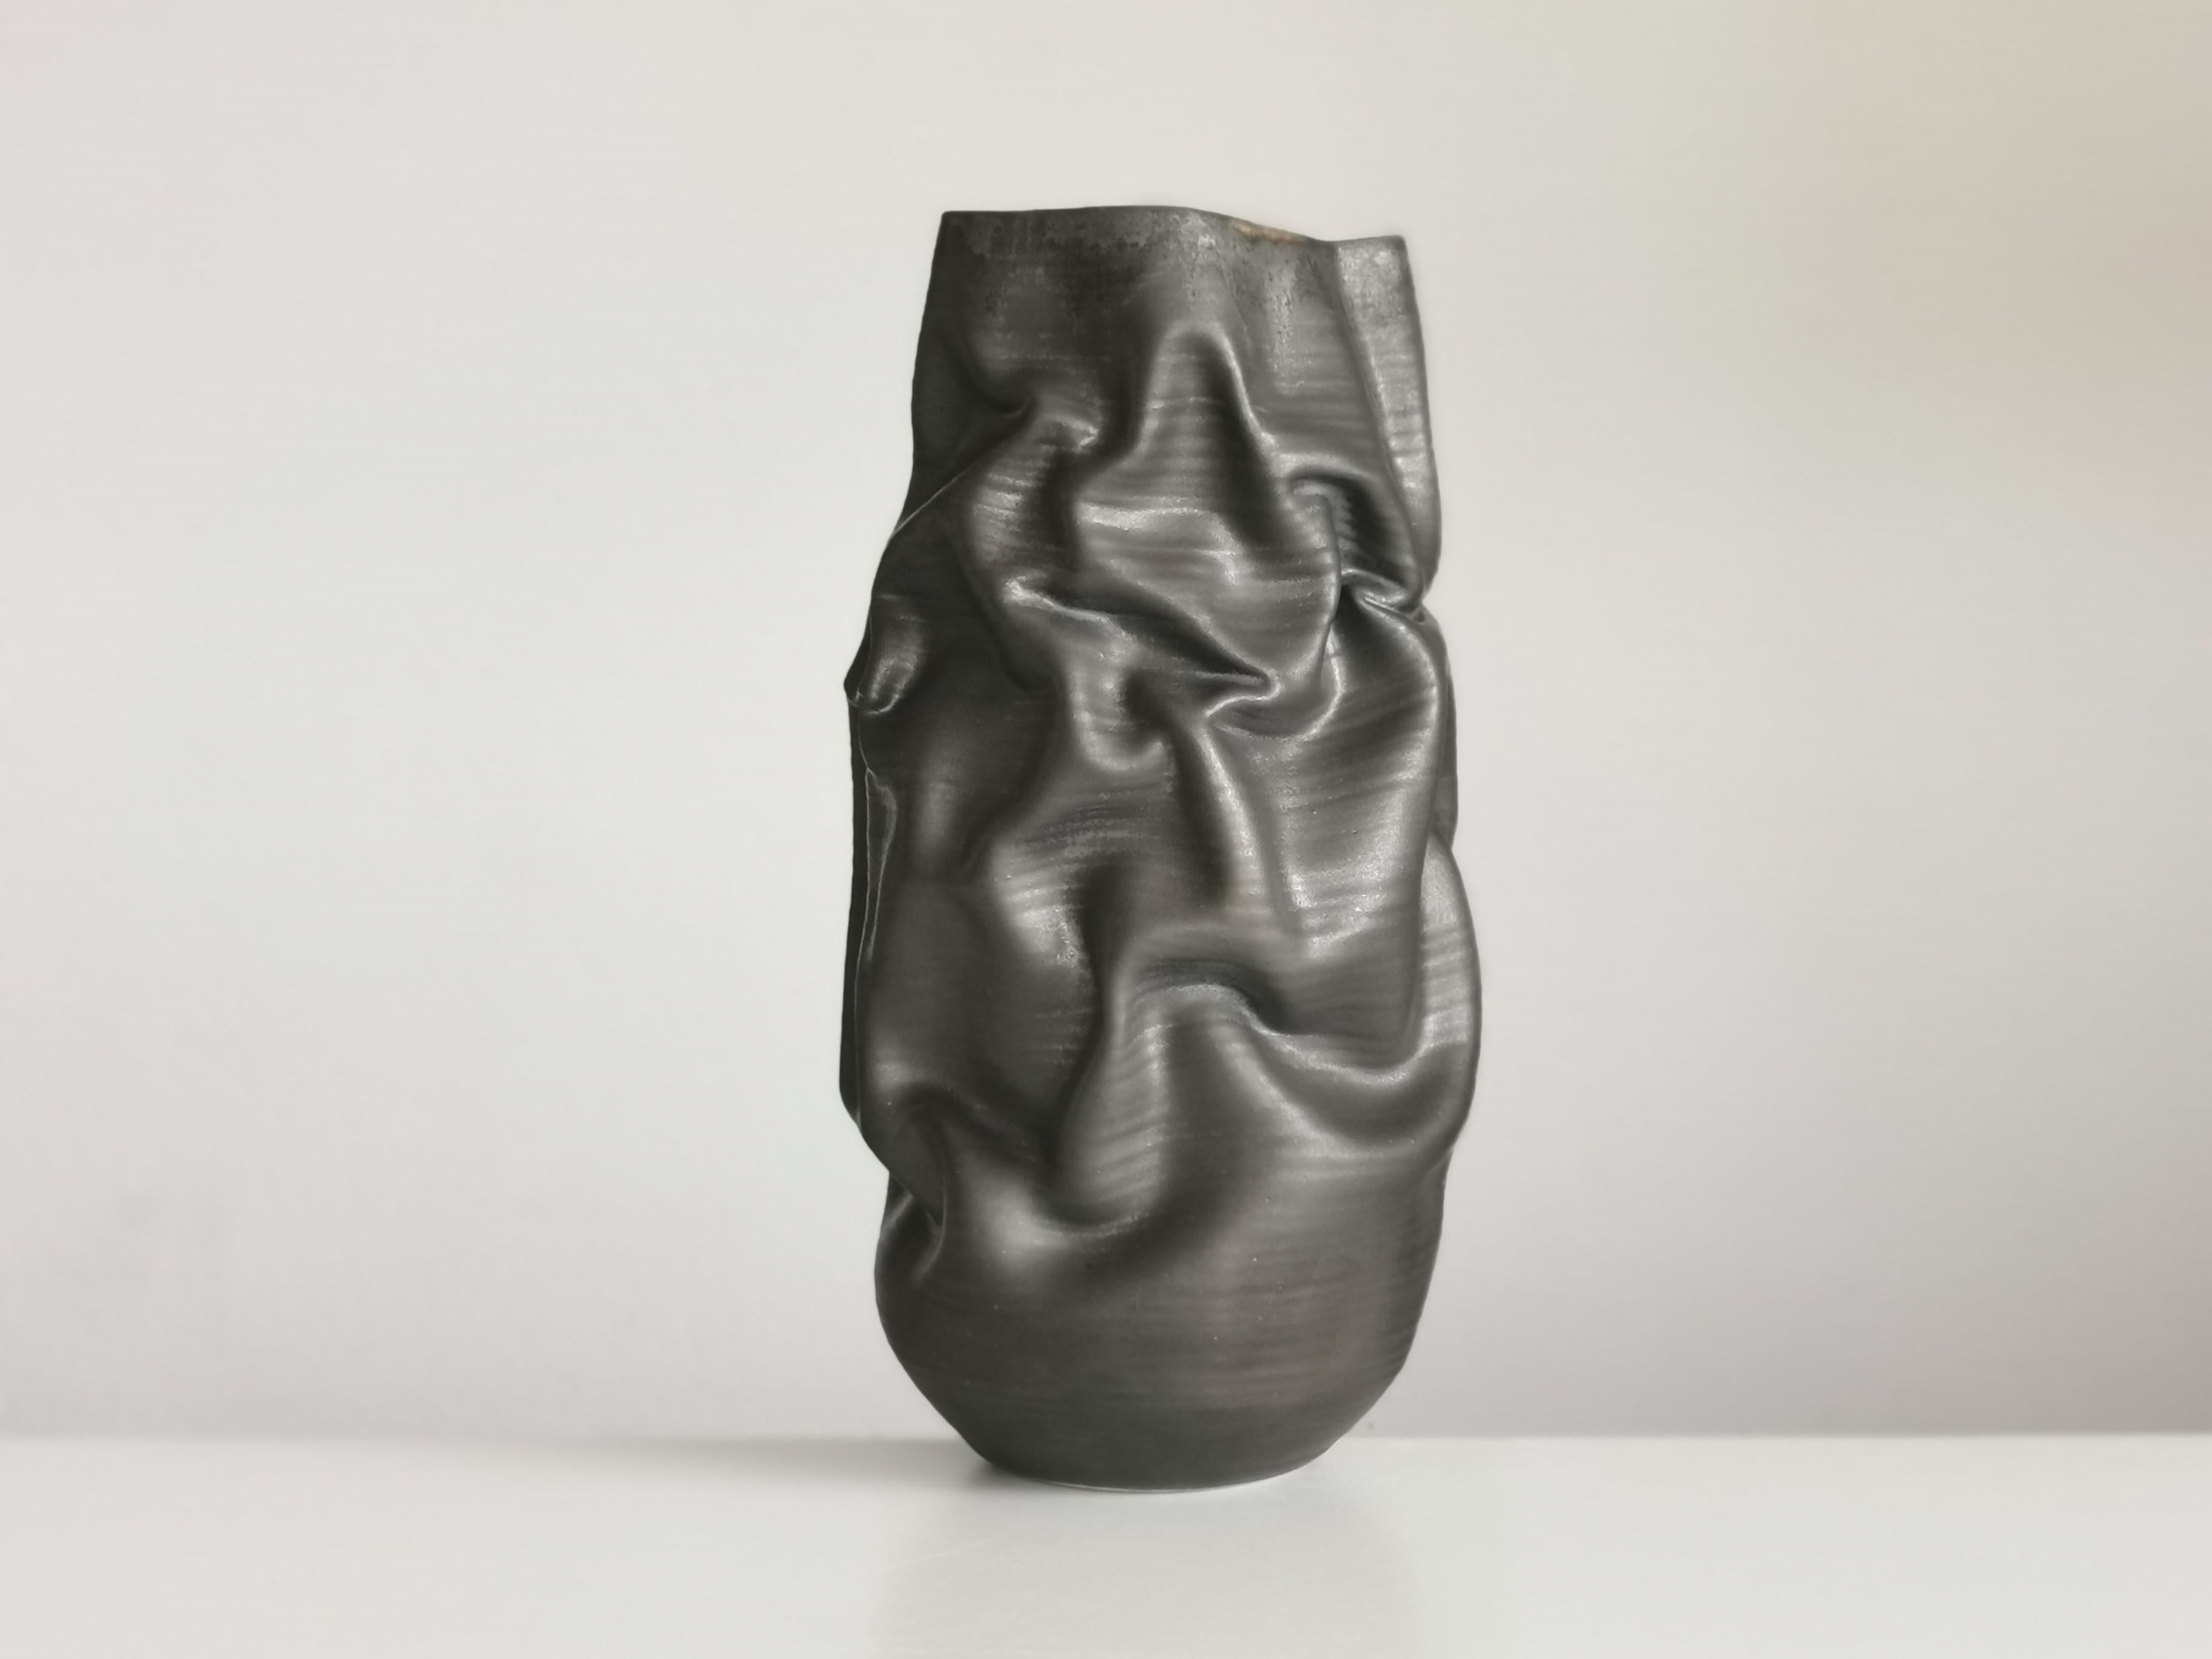 New sumptuous ceramic vessel from ceramic artist Nicholas Arroyave-Portela. Made in 2021.

Materials. White St. Thomas clay. Stoneware glazes. Multi fired to cone 9 (1260-1280 degrees)

Measures H 45 cm x W 20 cm x D 20 cm

The artist starts